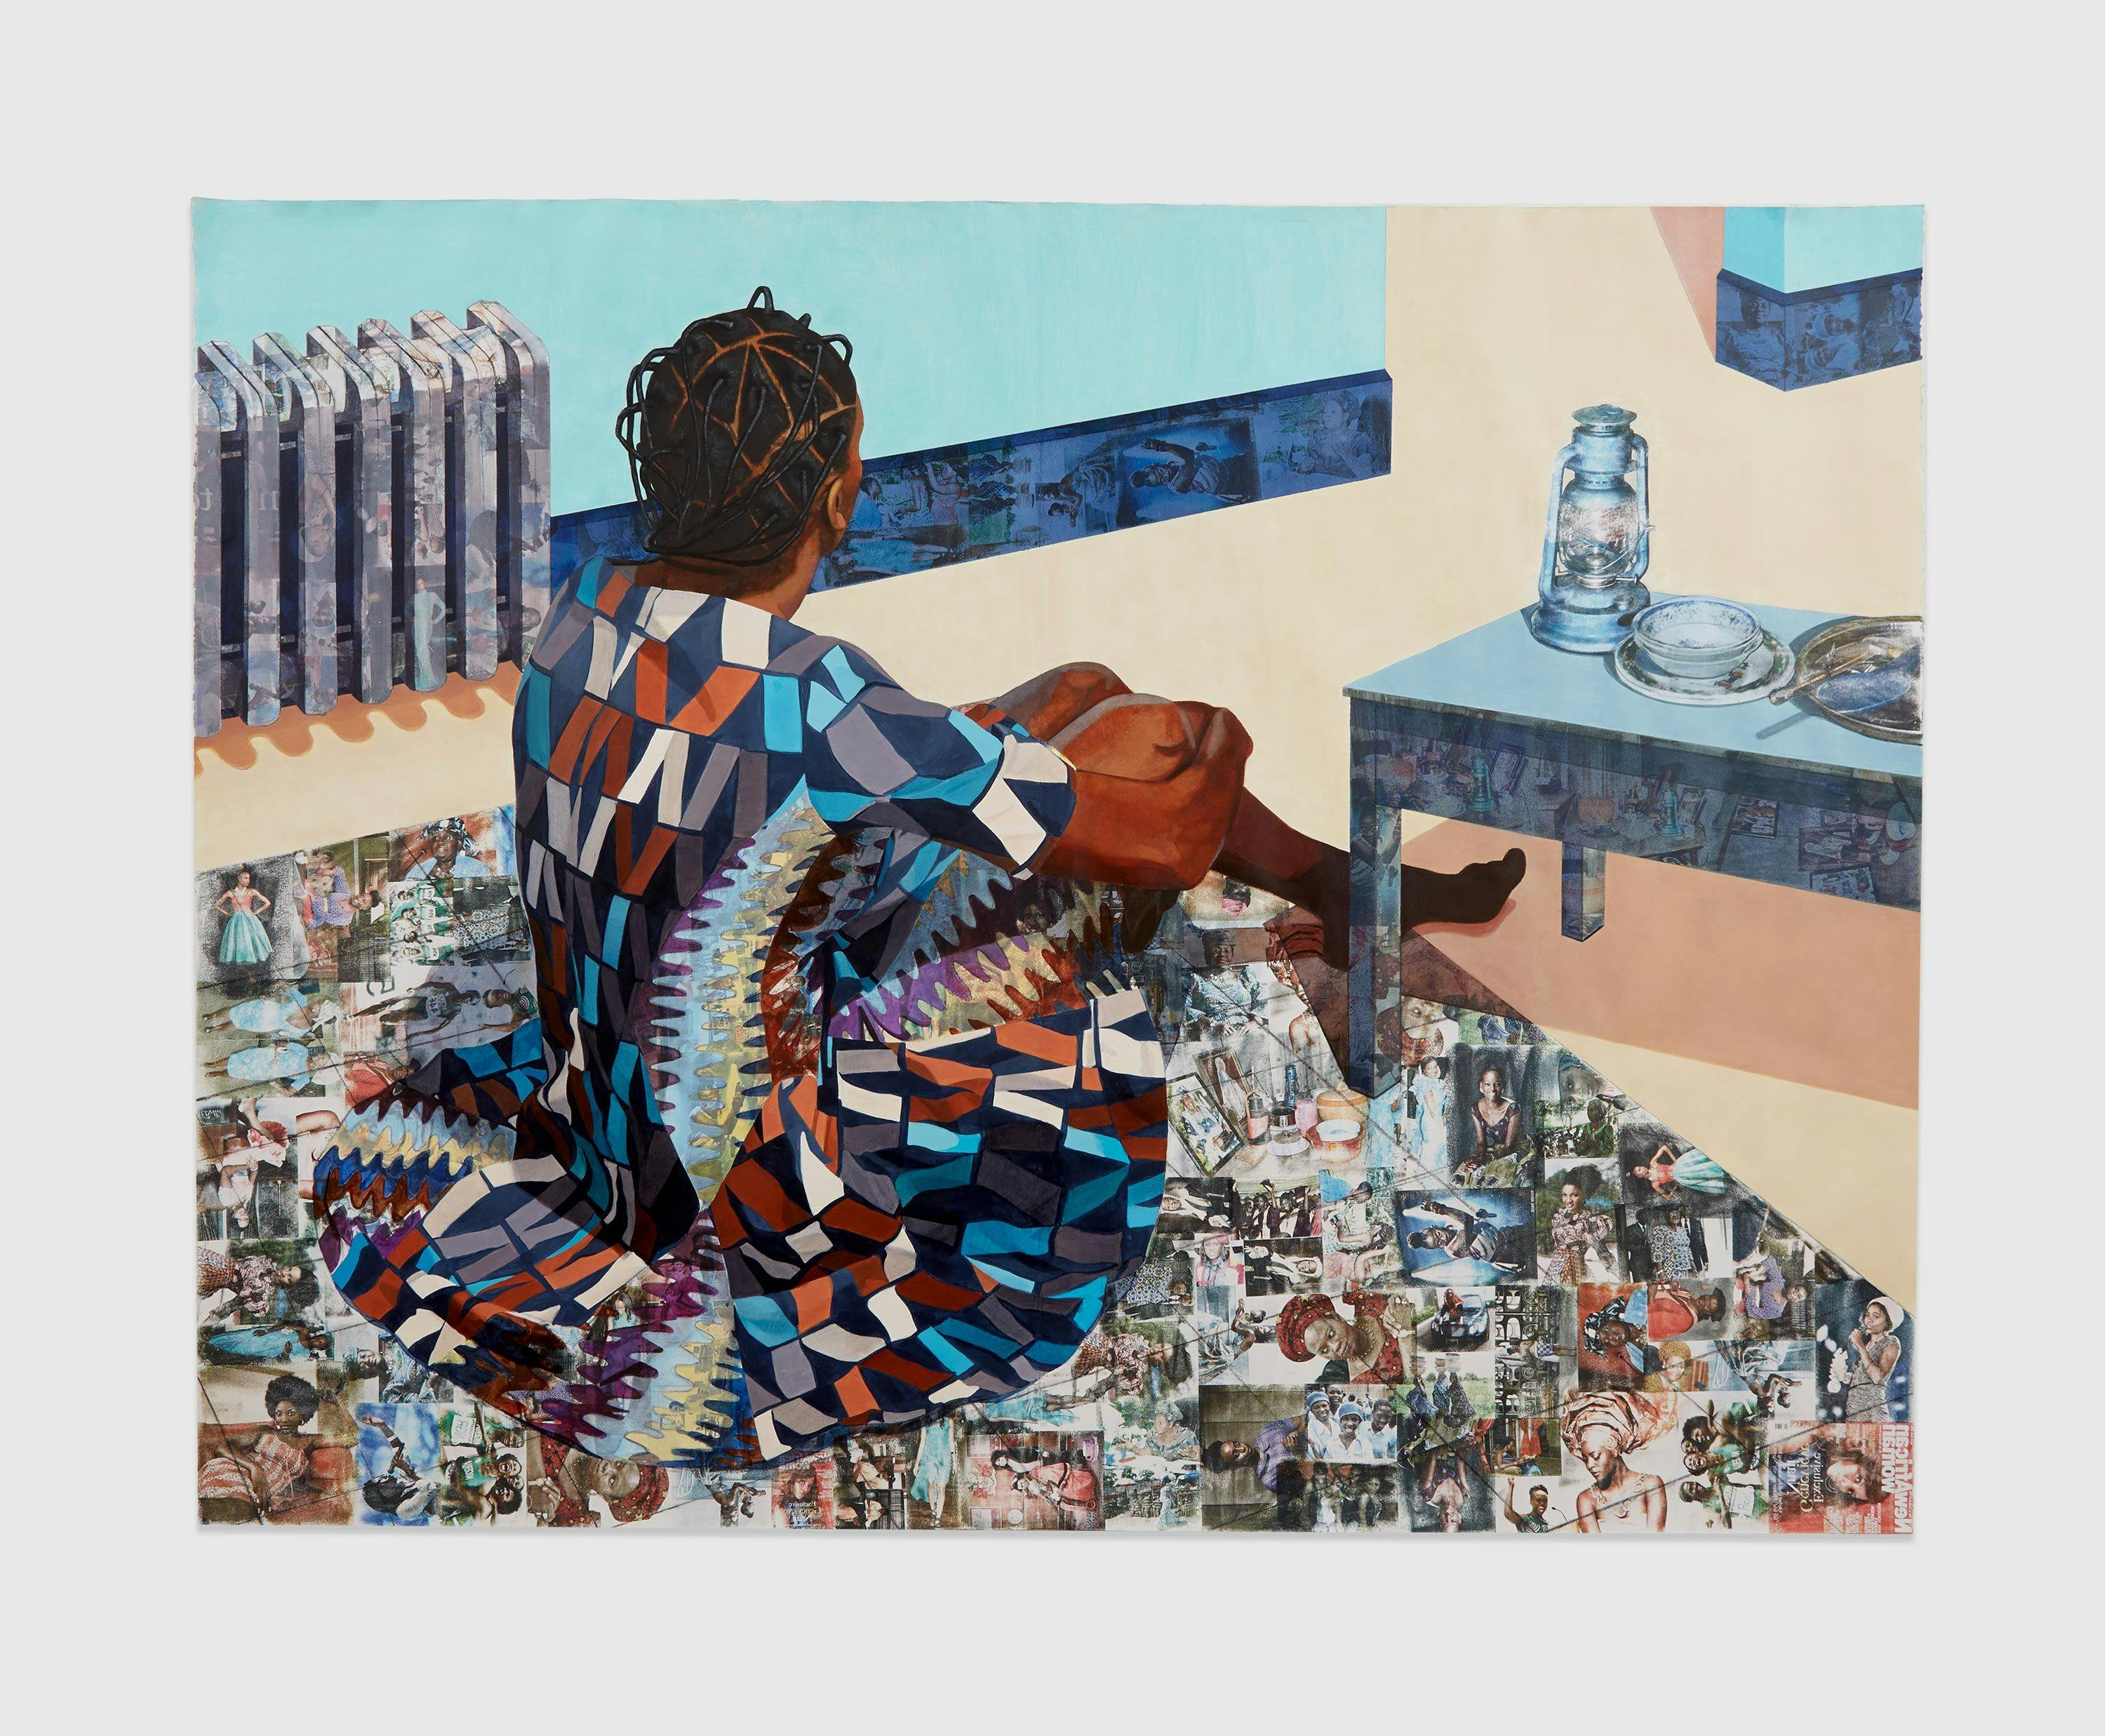 A mixed media by Njideka Akunyili Crosby, titled “The Beautyful Ones Are Not Yet Born” Might Not Hold True For Much Longer, dated 2013.